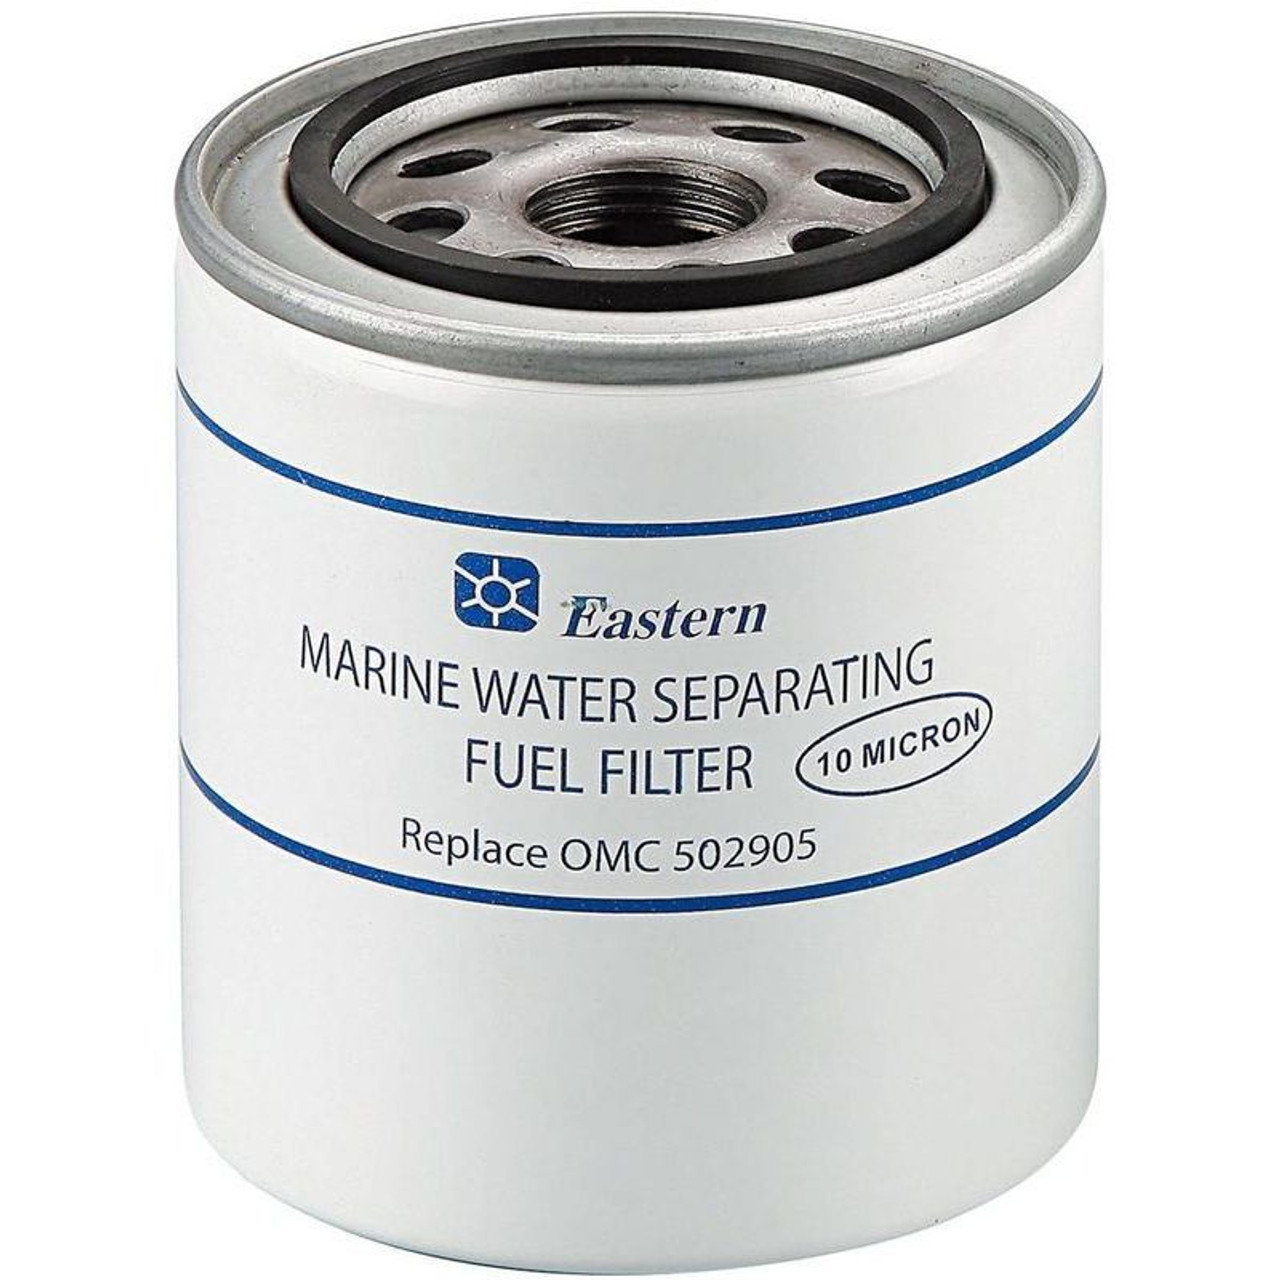 Outboard Fuel Filter Replacement OMC